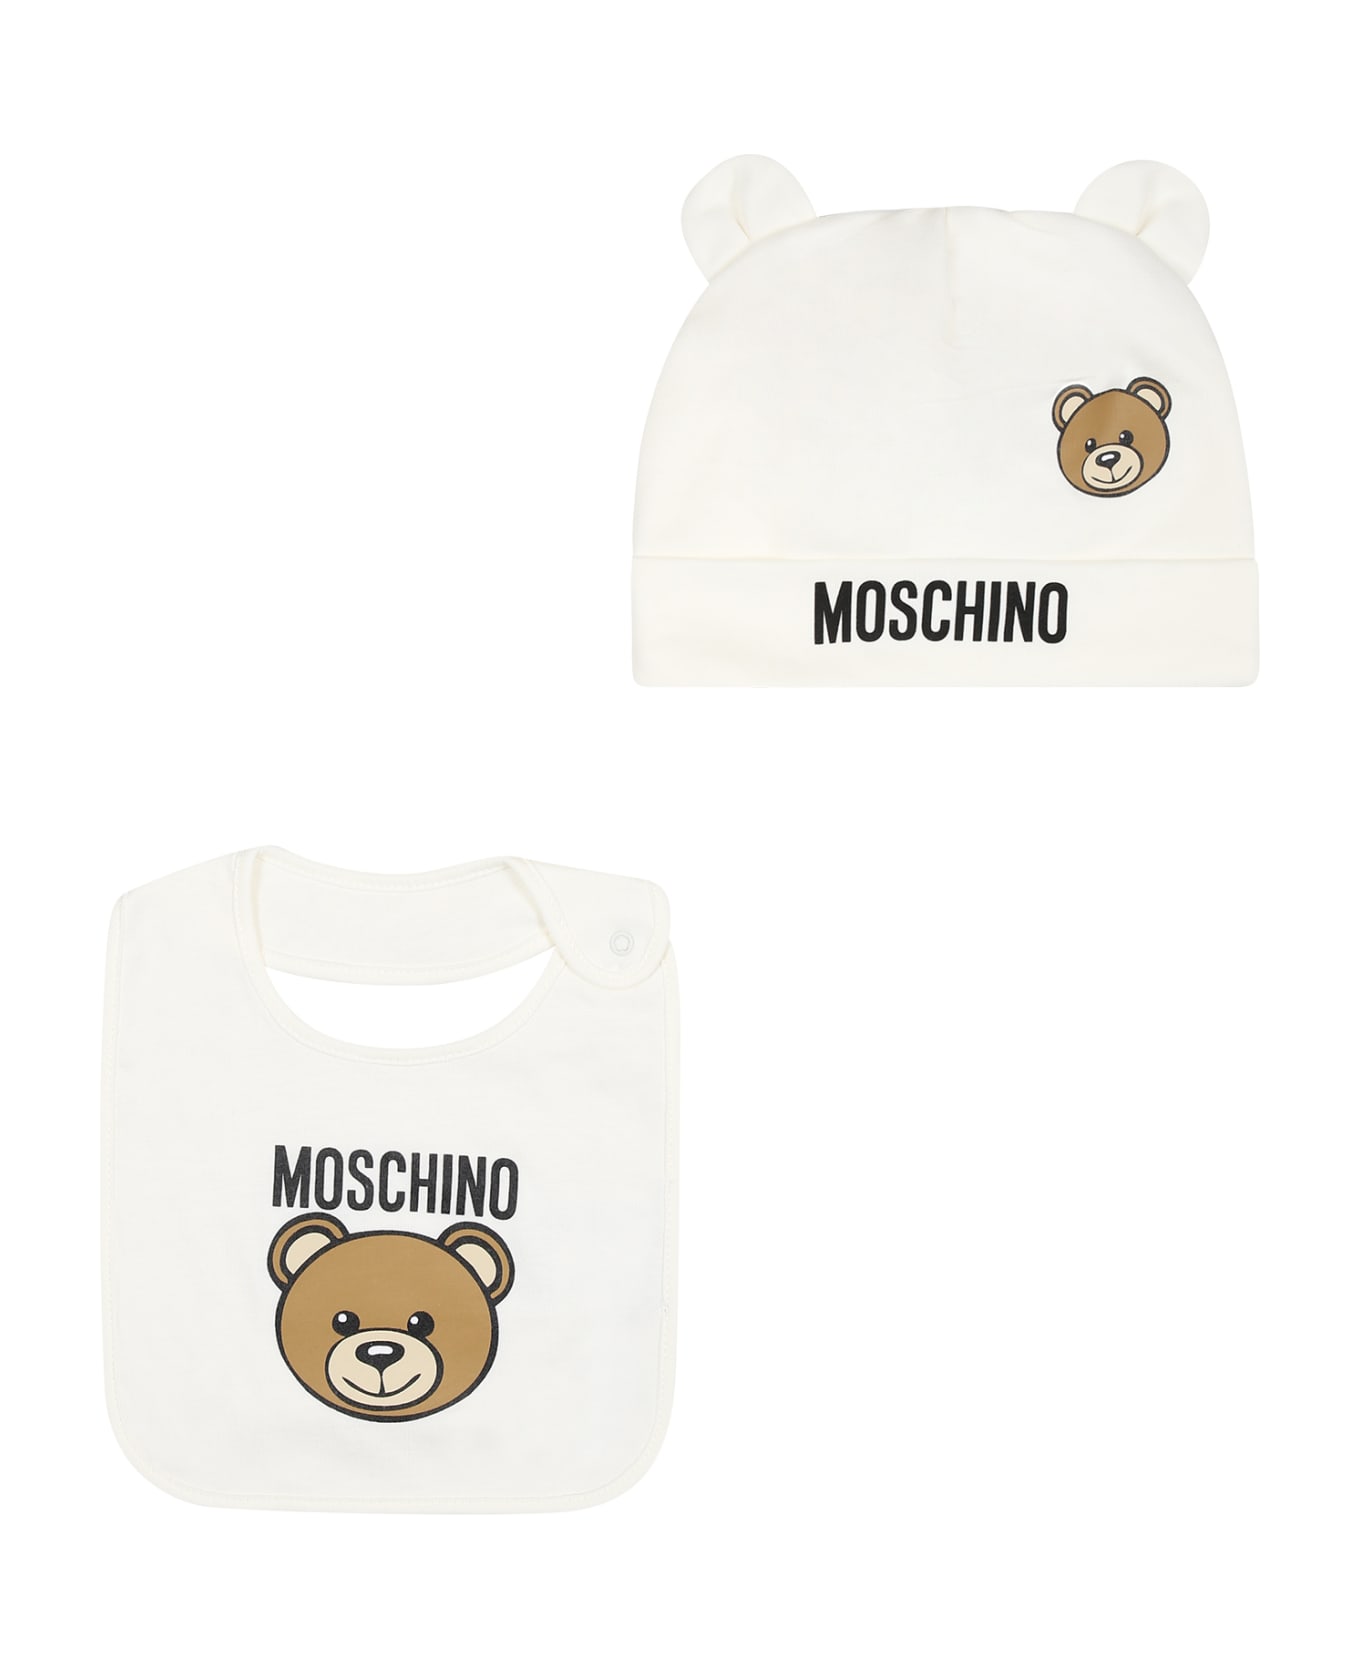 Moschino White Set For Baby Kids With Teddy Bear - White